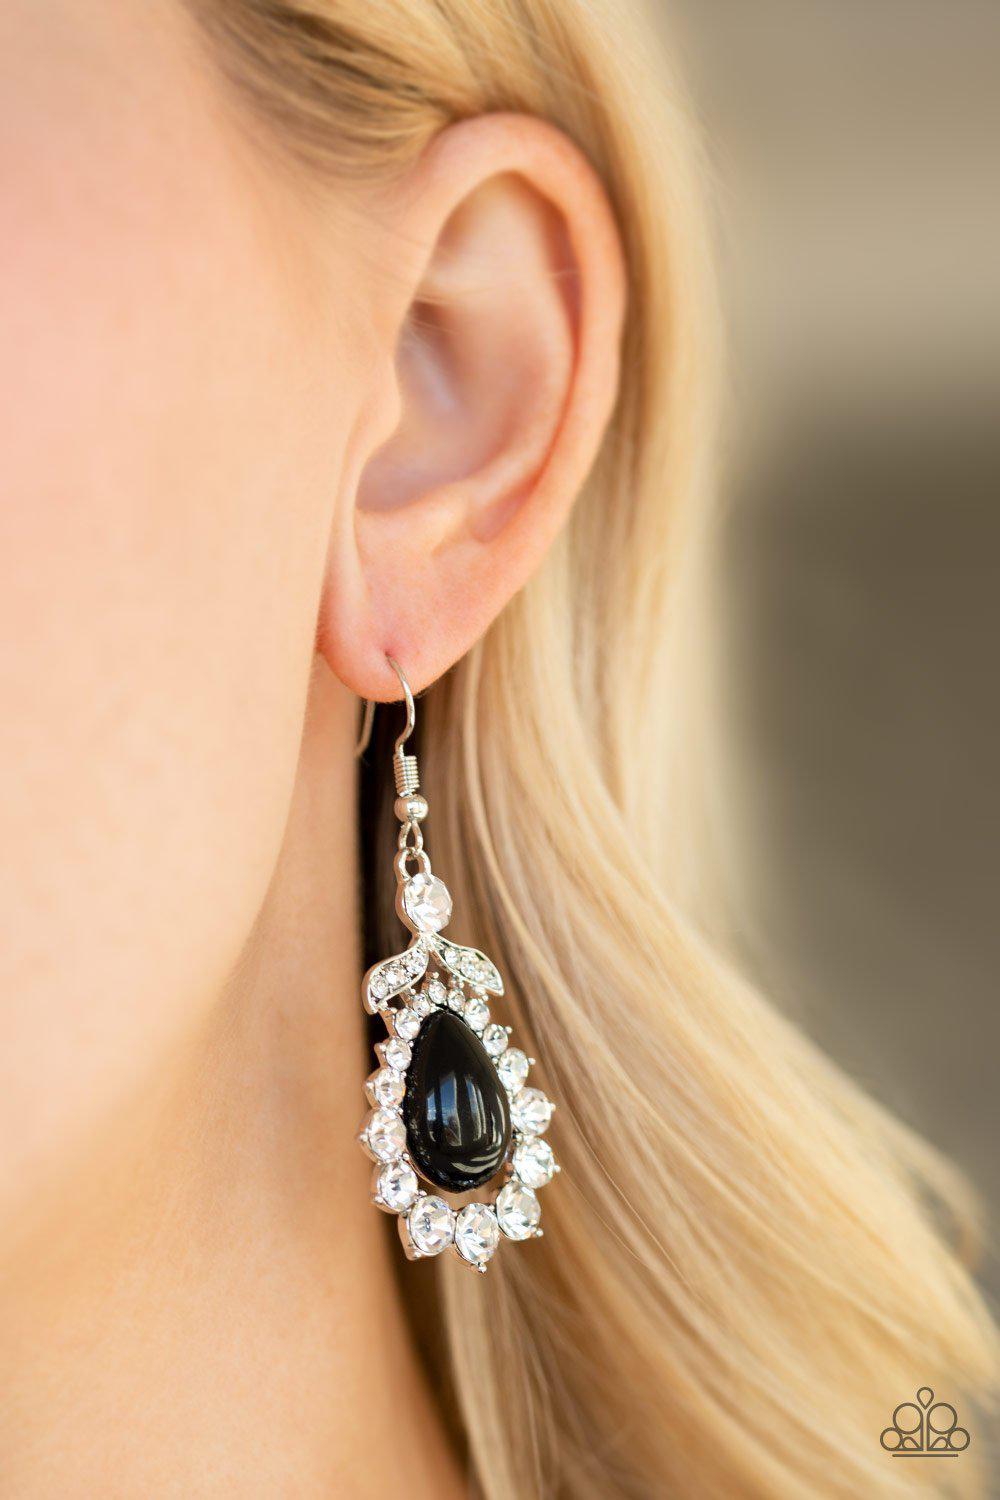 Award Winning Shimmer Black and White Rhinestone Earrings - Paparazzi Accessories - model -CarasShop.com - $5 Jewelry by Cara Jewels